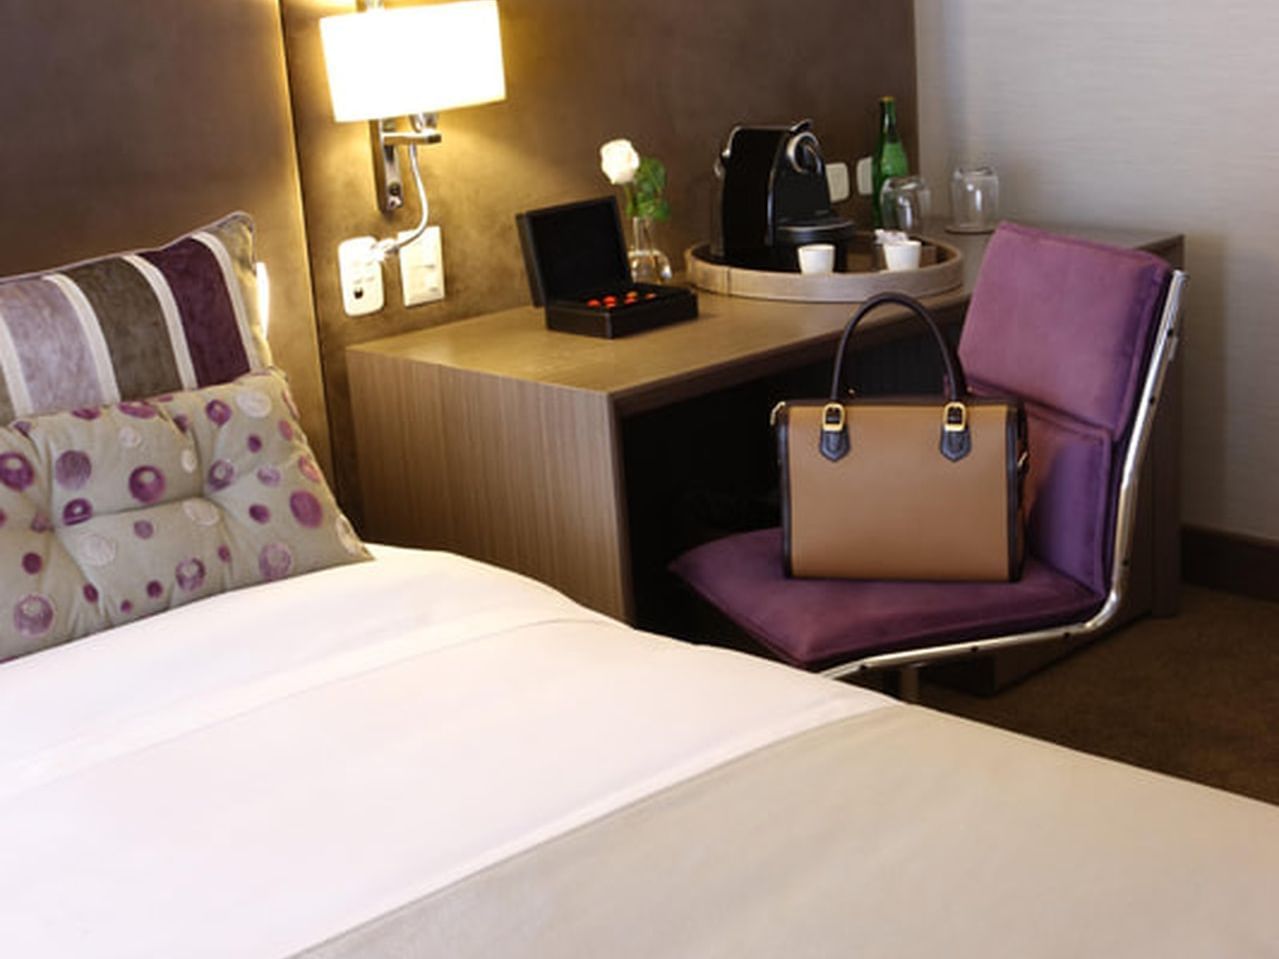 Bed & furniture in Deluxe Suite at Recoleta Grand Hotel